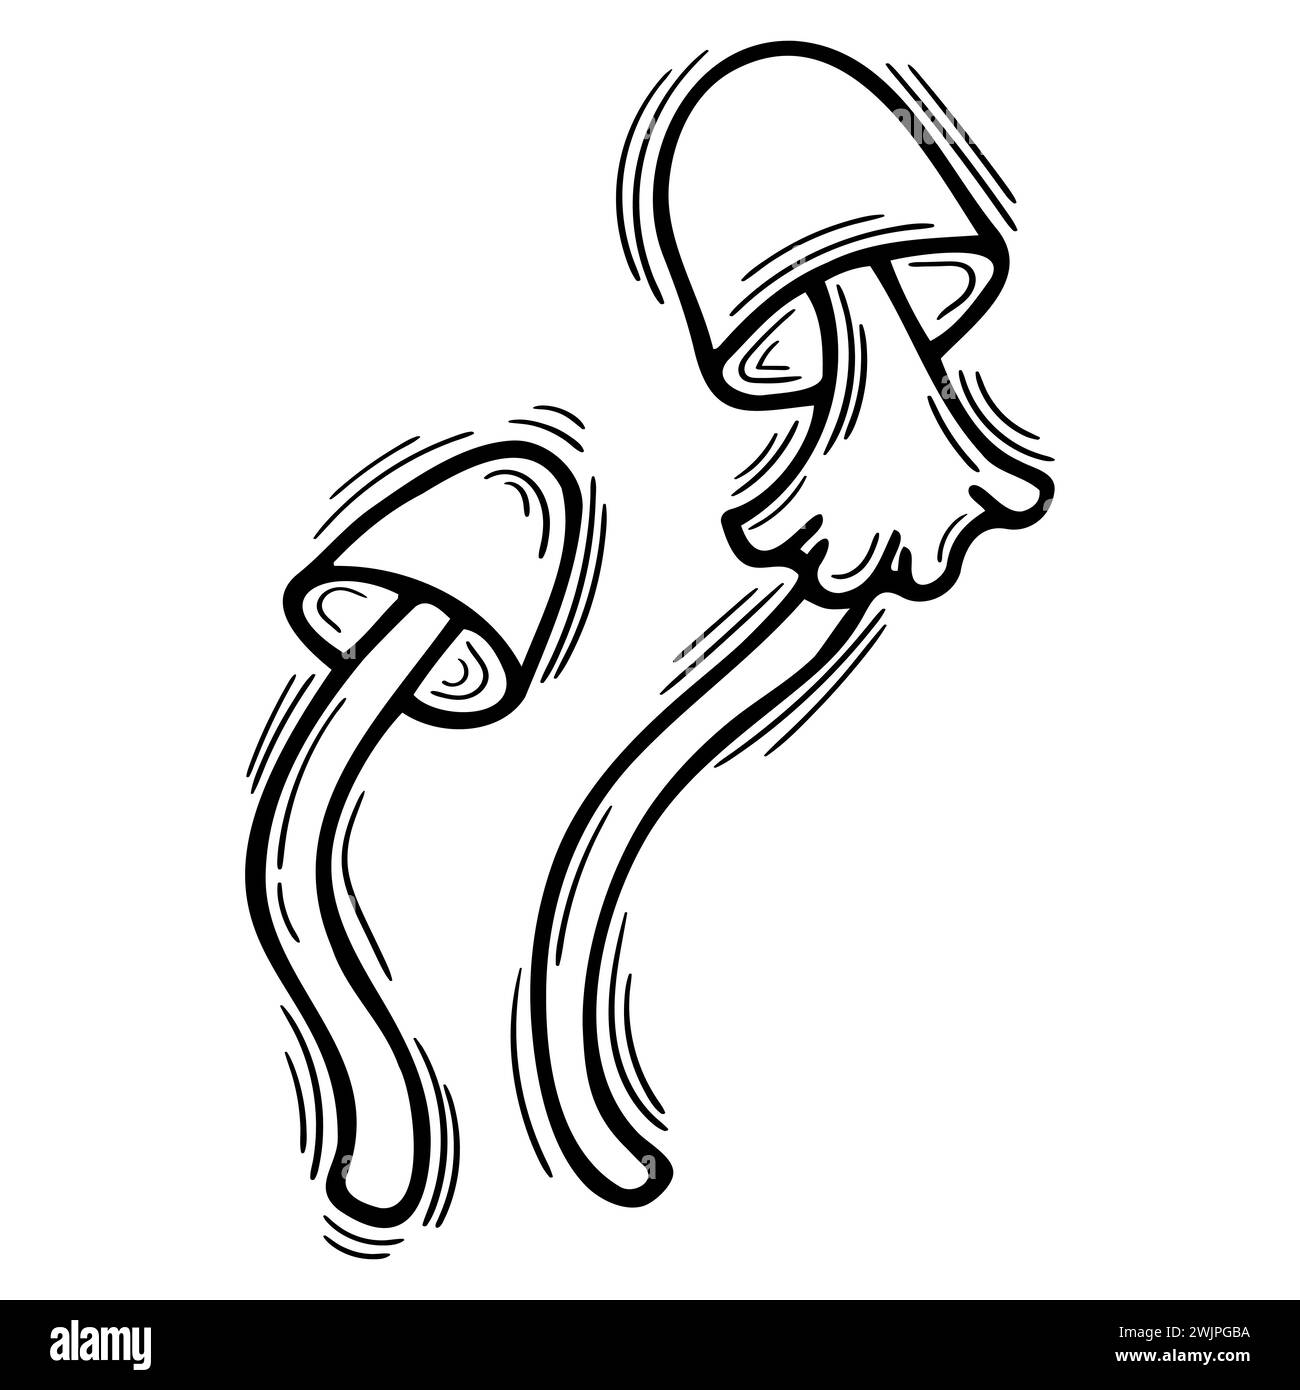 Hand drawn mushrooms. Doodle style element. Sketched design. Vector illustration Stock Vector